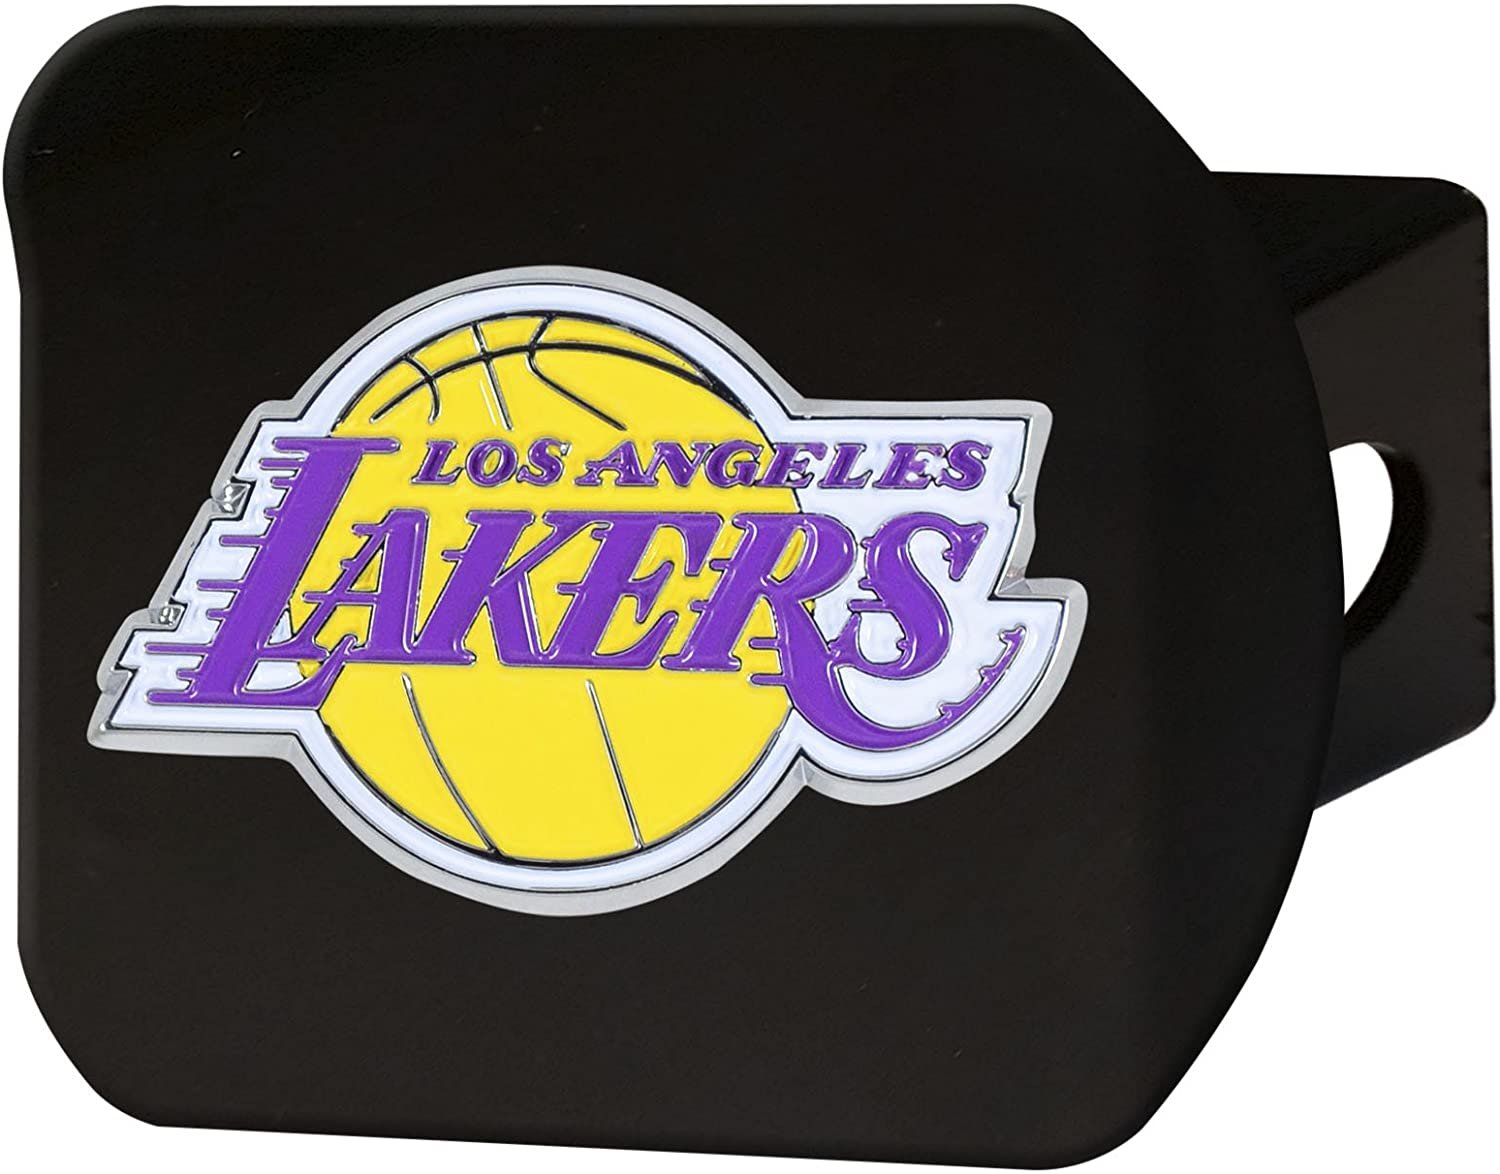 Los Angeles Lakers Solid Metal Black Hitch Cover with Color Metal Emblem 2 Inch Square Type III